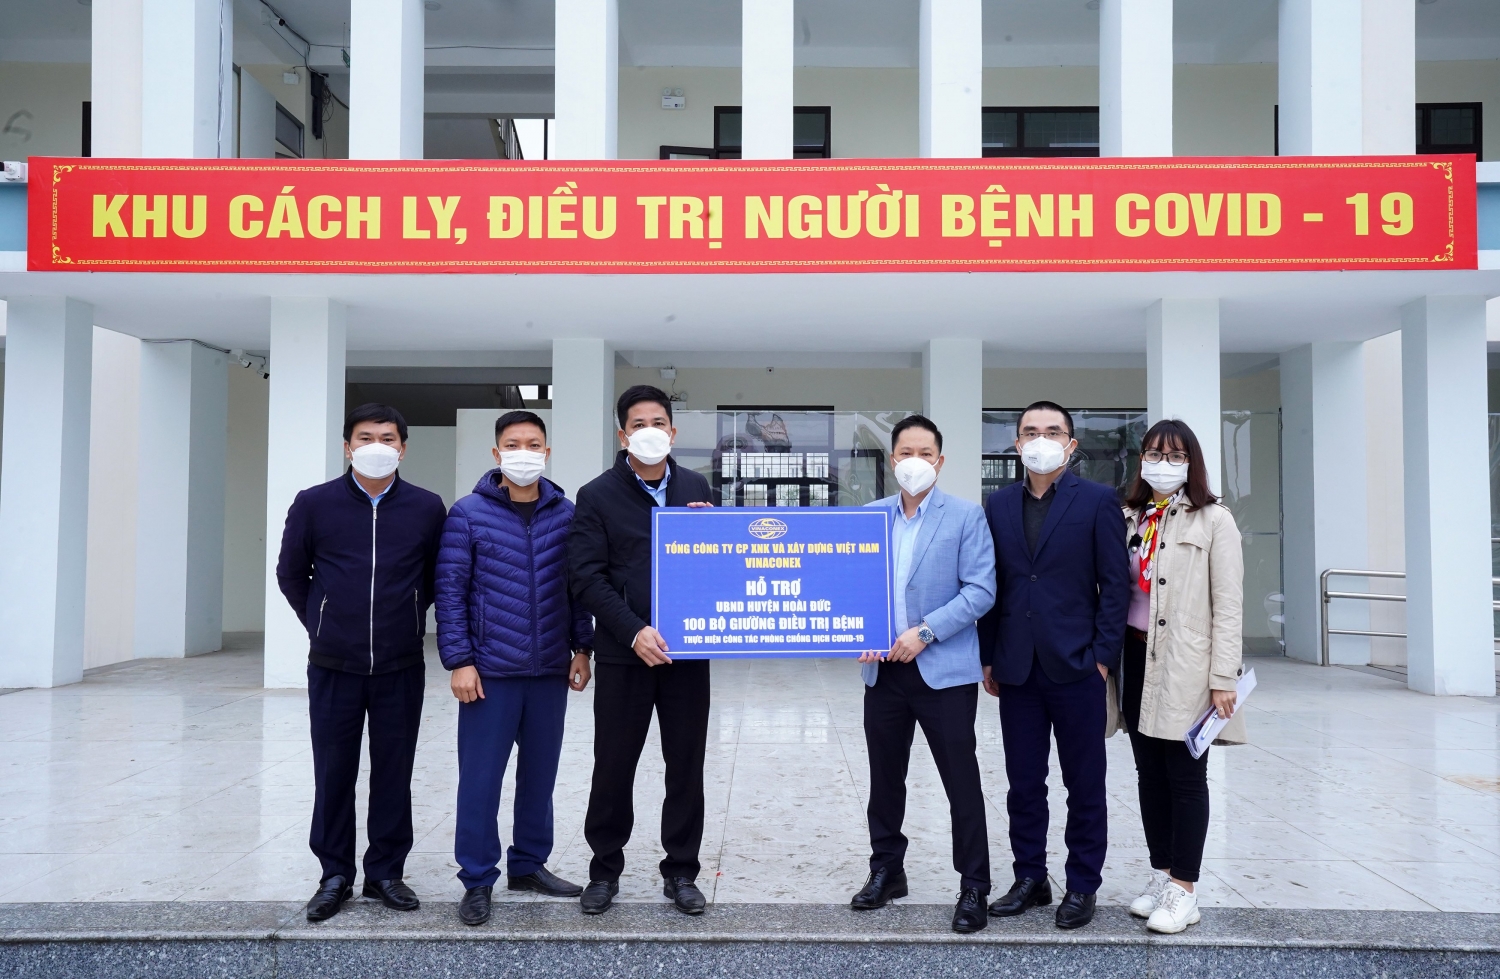 Vinaconex supports Hoai Duc District with medical equipment for disease prevention